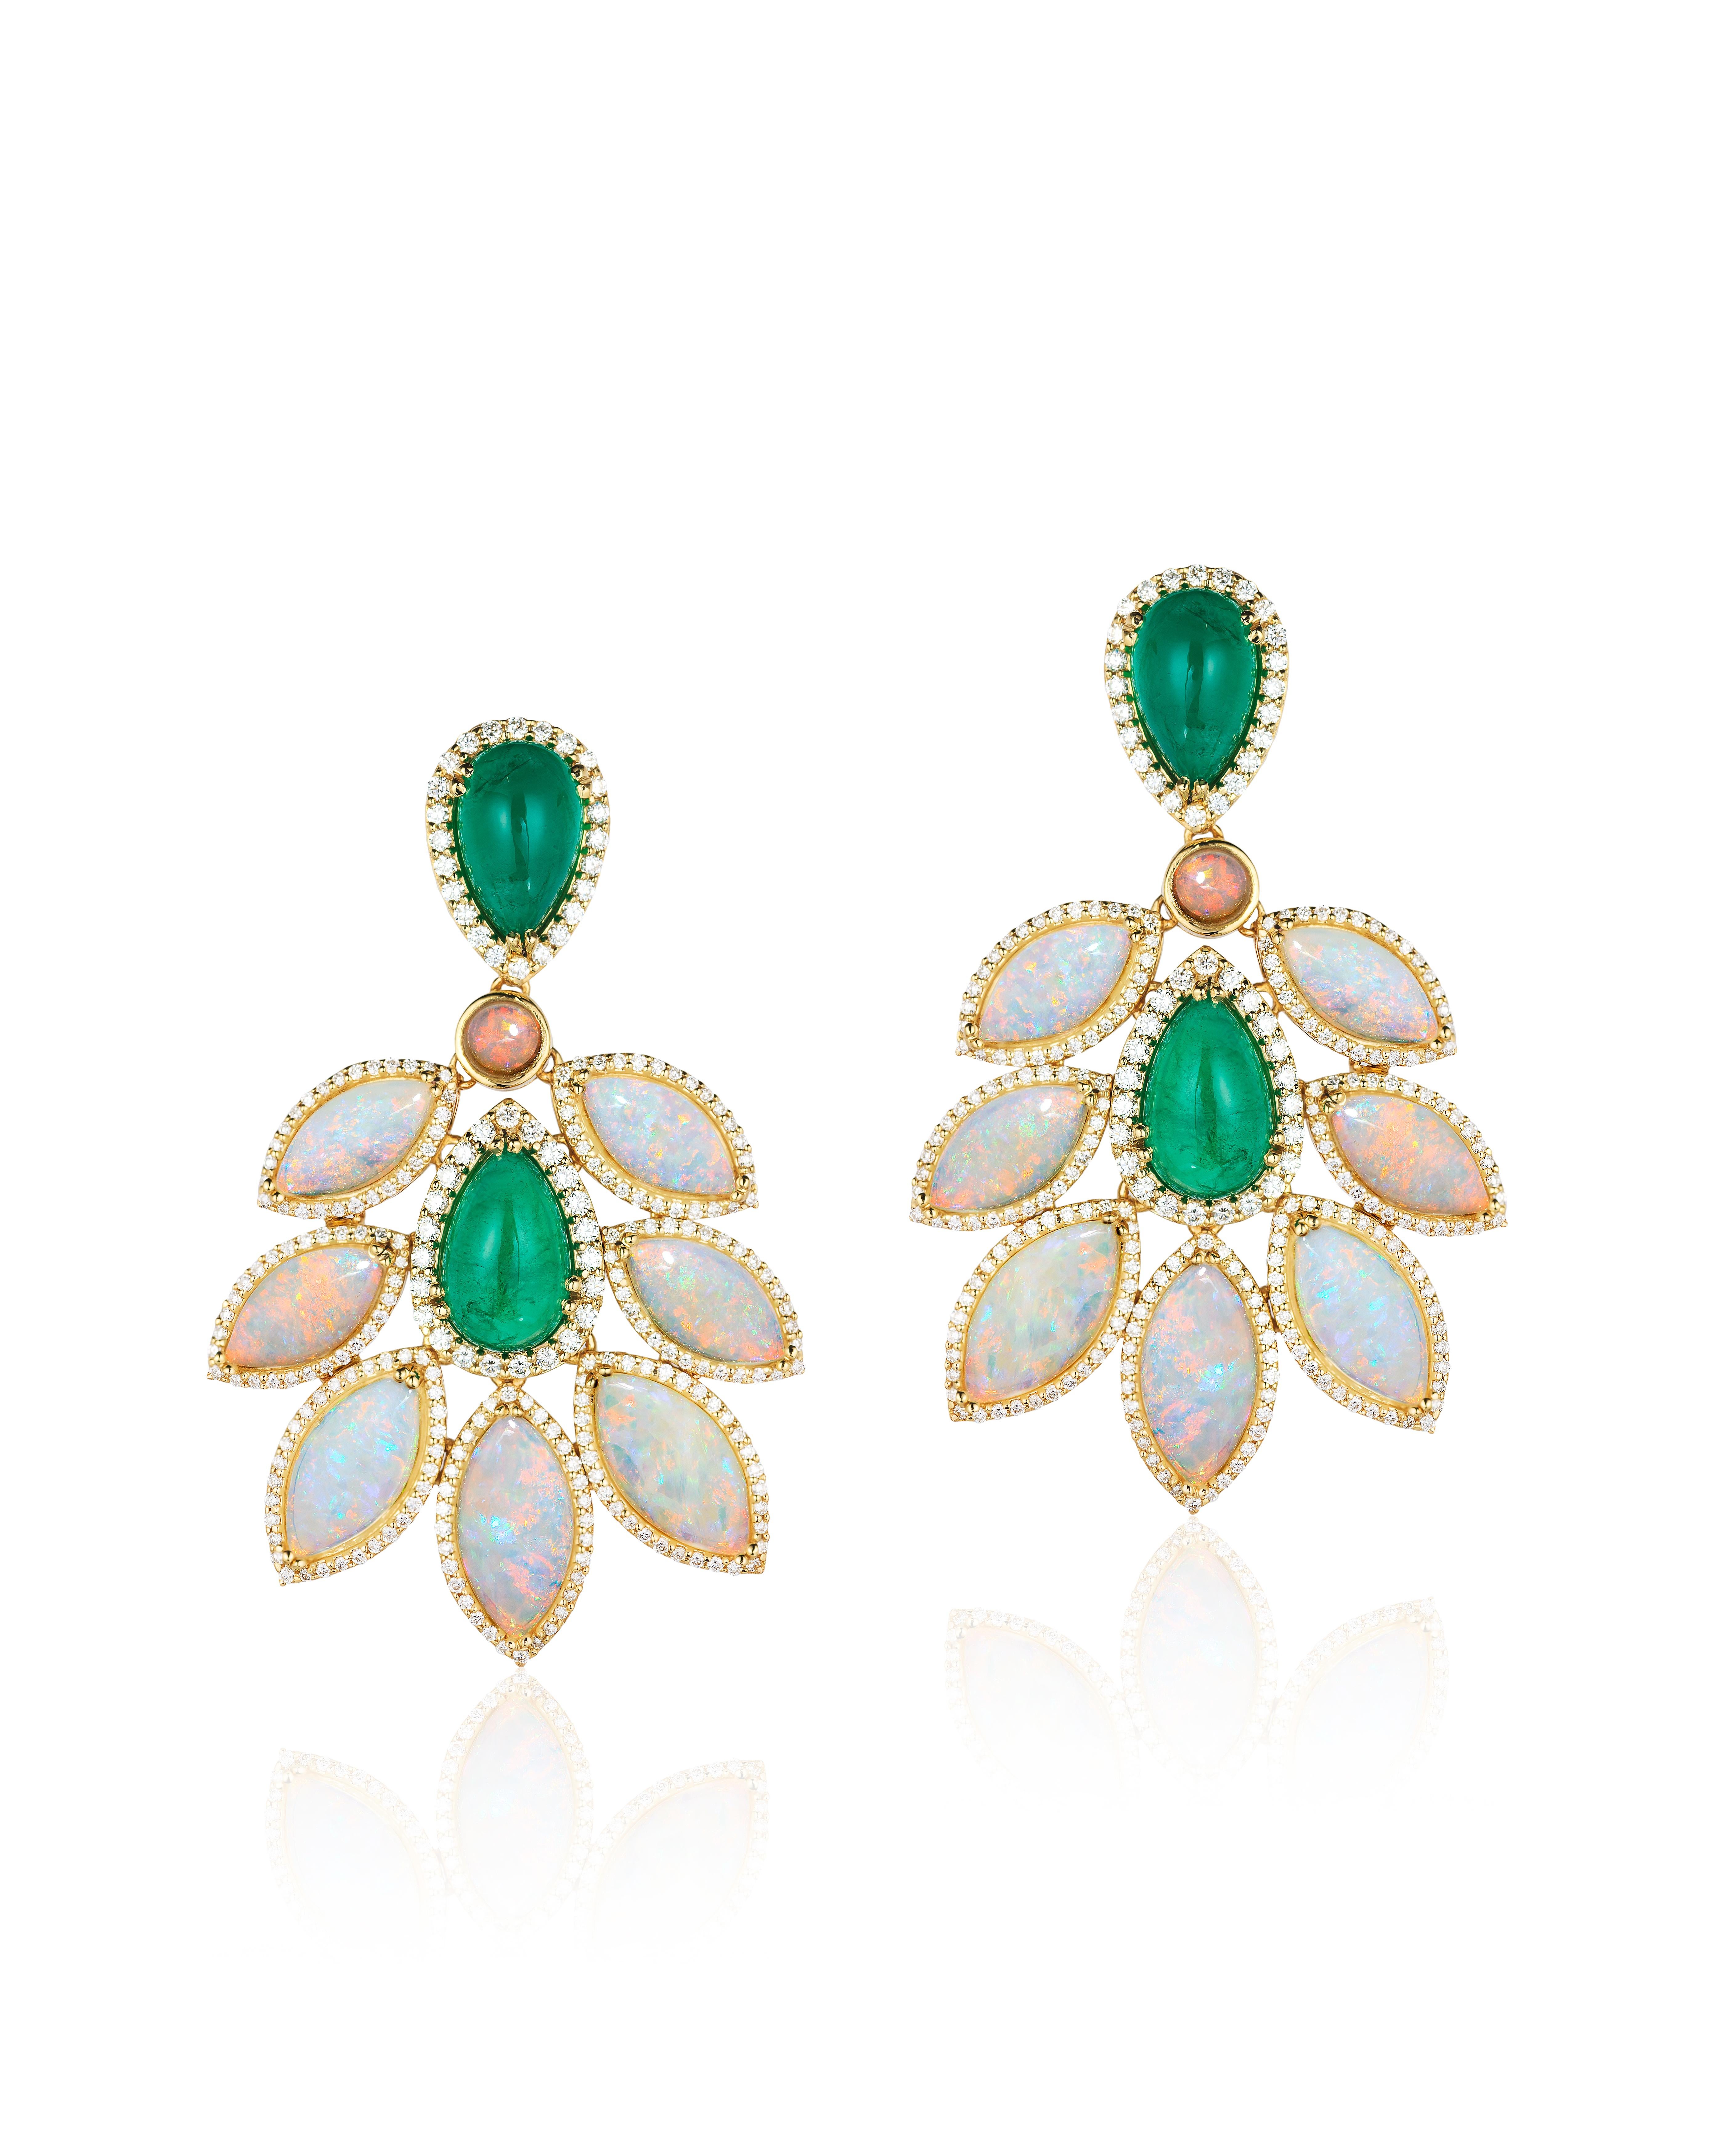 Pear Cut Goshwara Pear Shape Emerald Cabs with Opal Marquise and Diamond Earrings For Sale